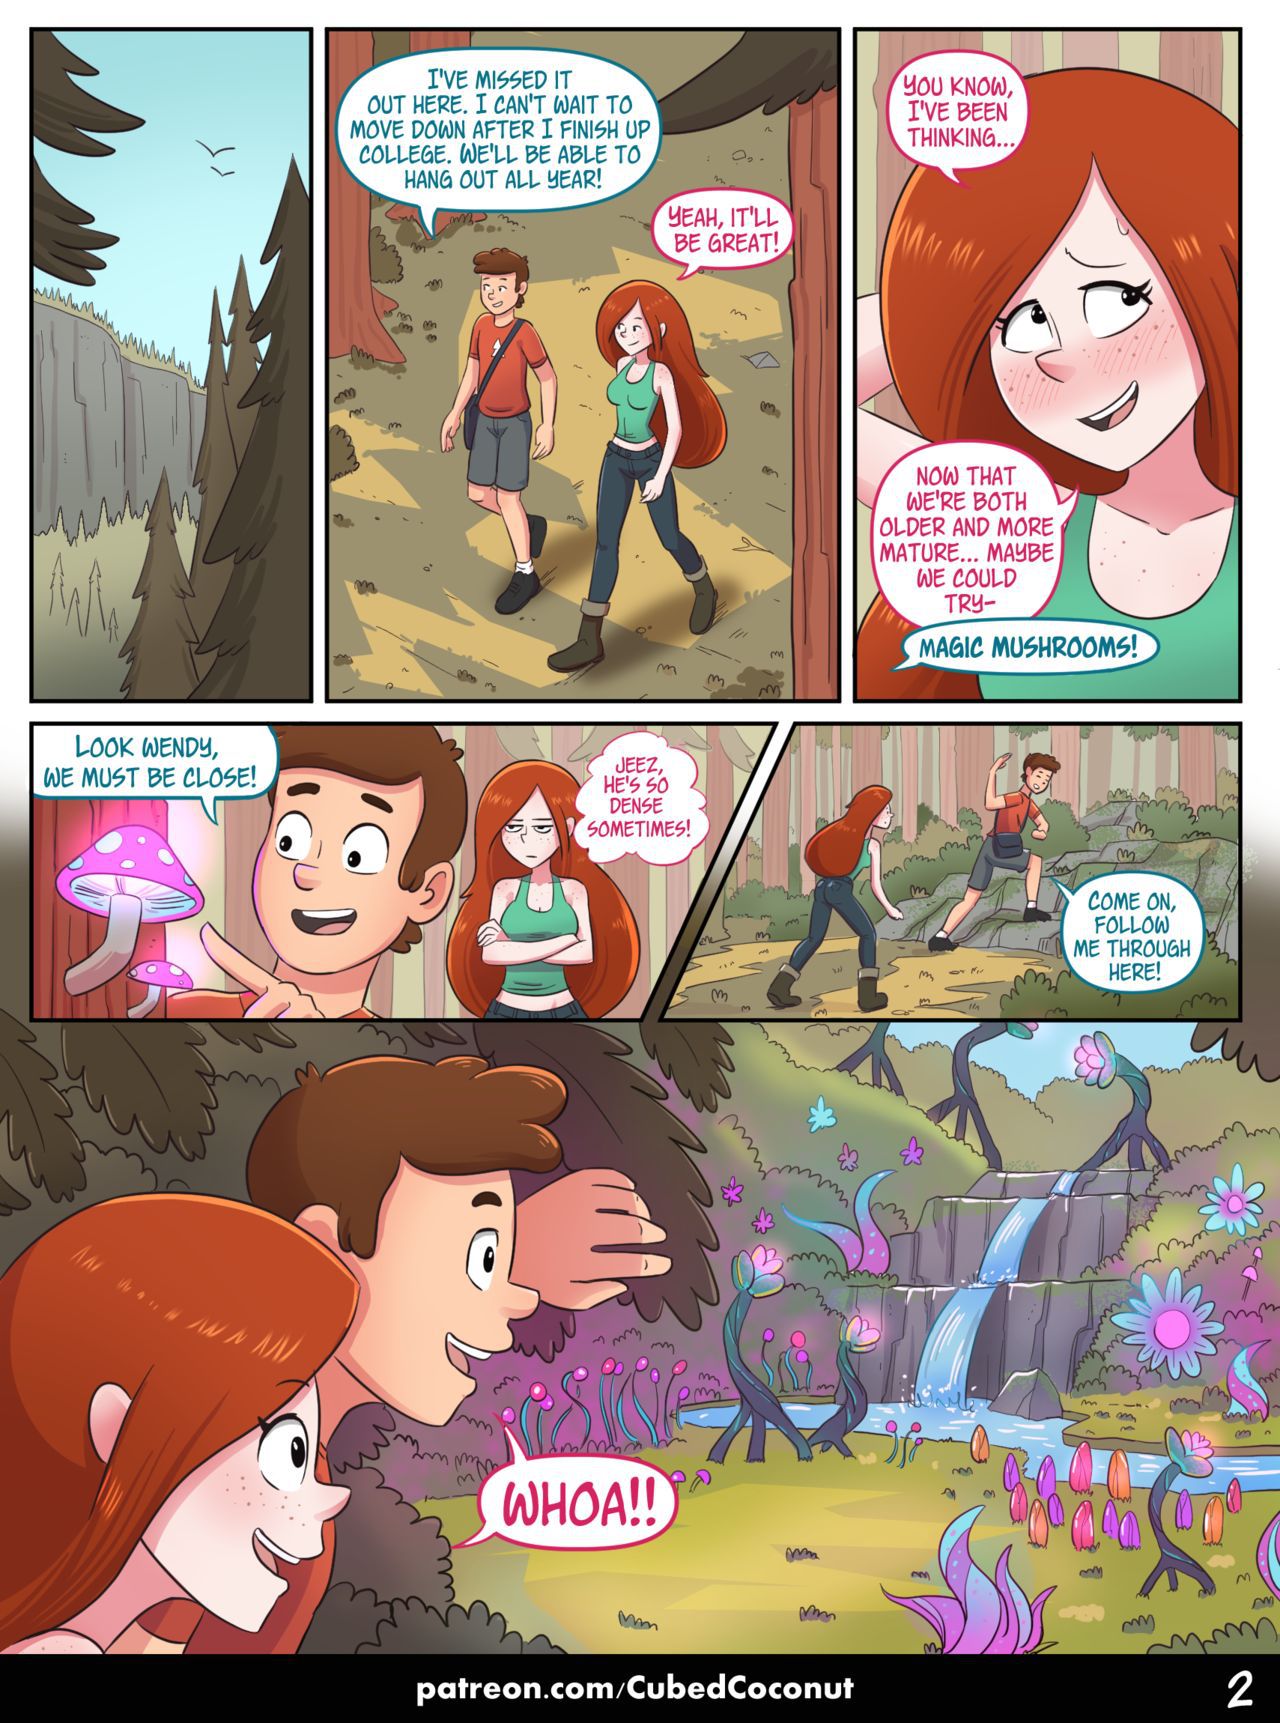 [Cubed Coconut] Wendy's Confession (Gravity Falls) [Ongoing] 3